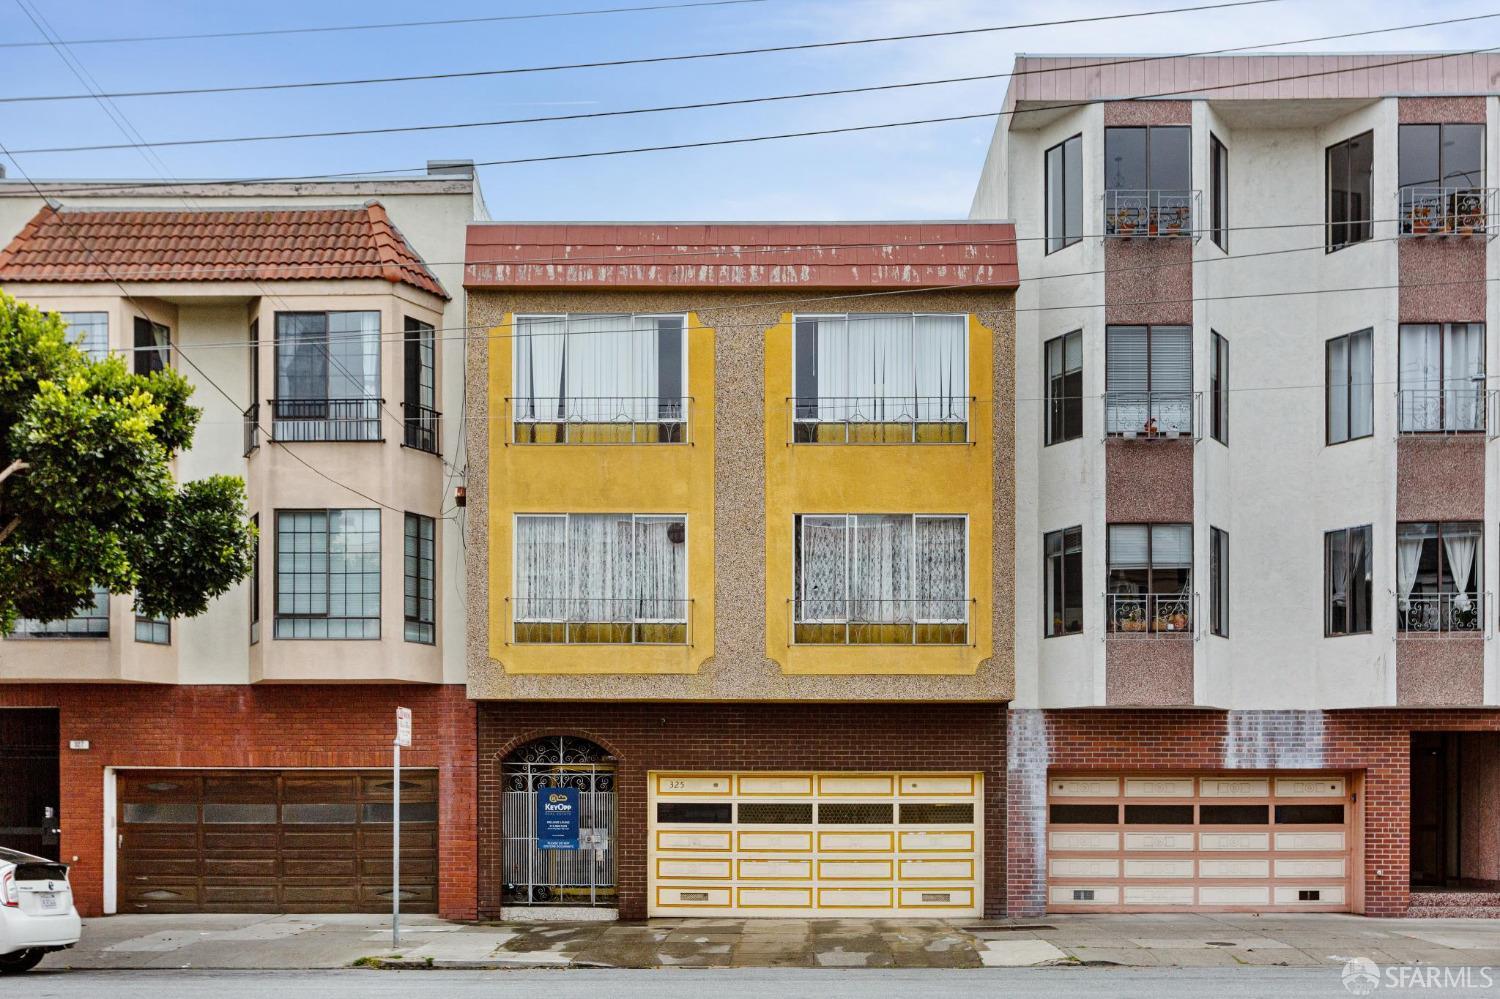 Photo of 325 24th Ave in San Francisco, CA